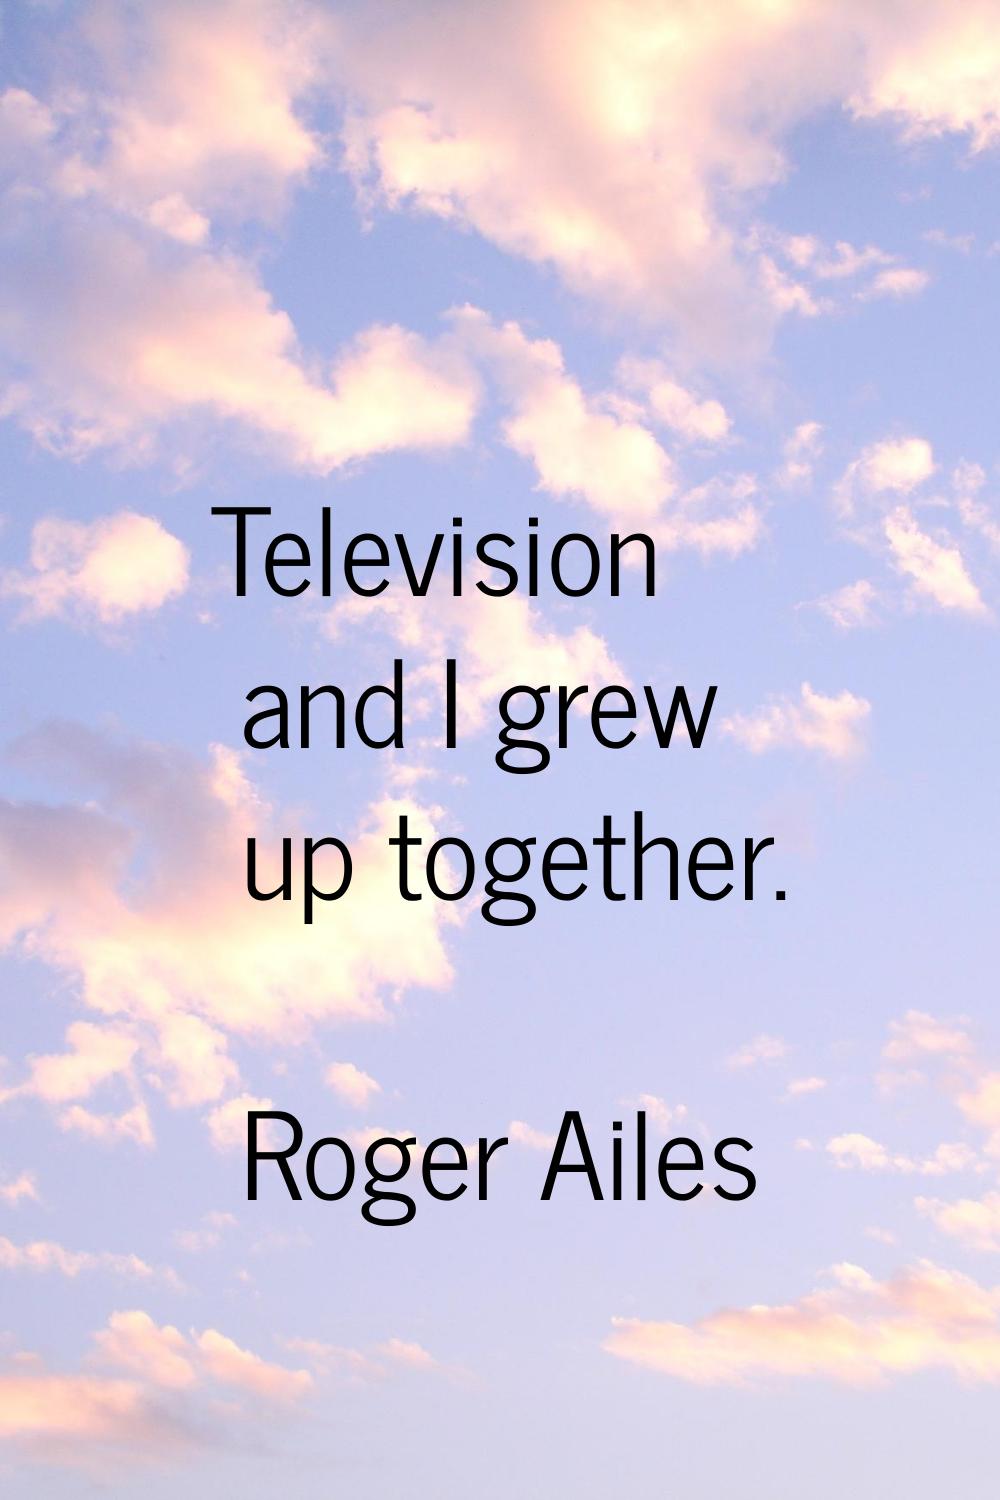 Television and I grew up together.